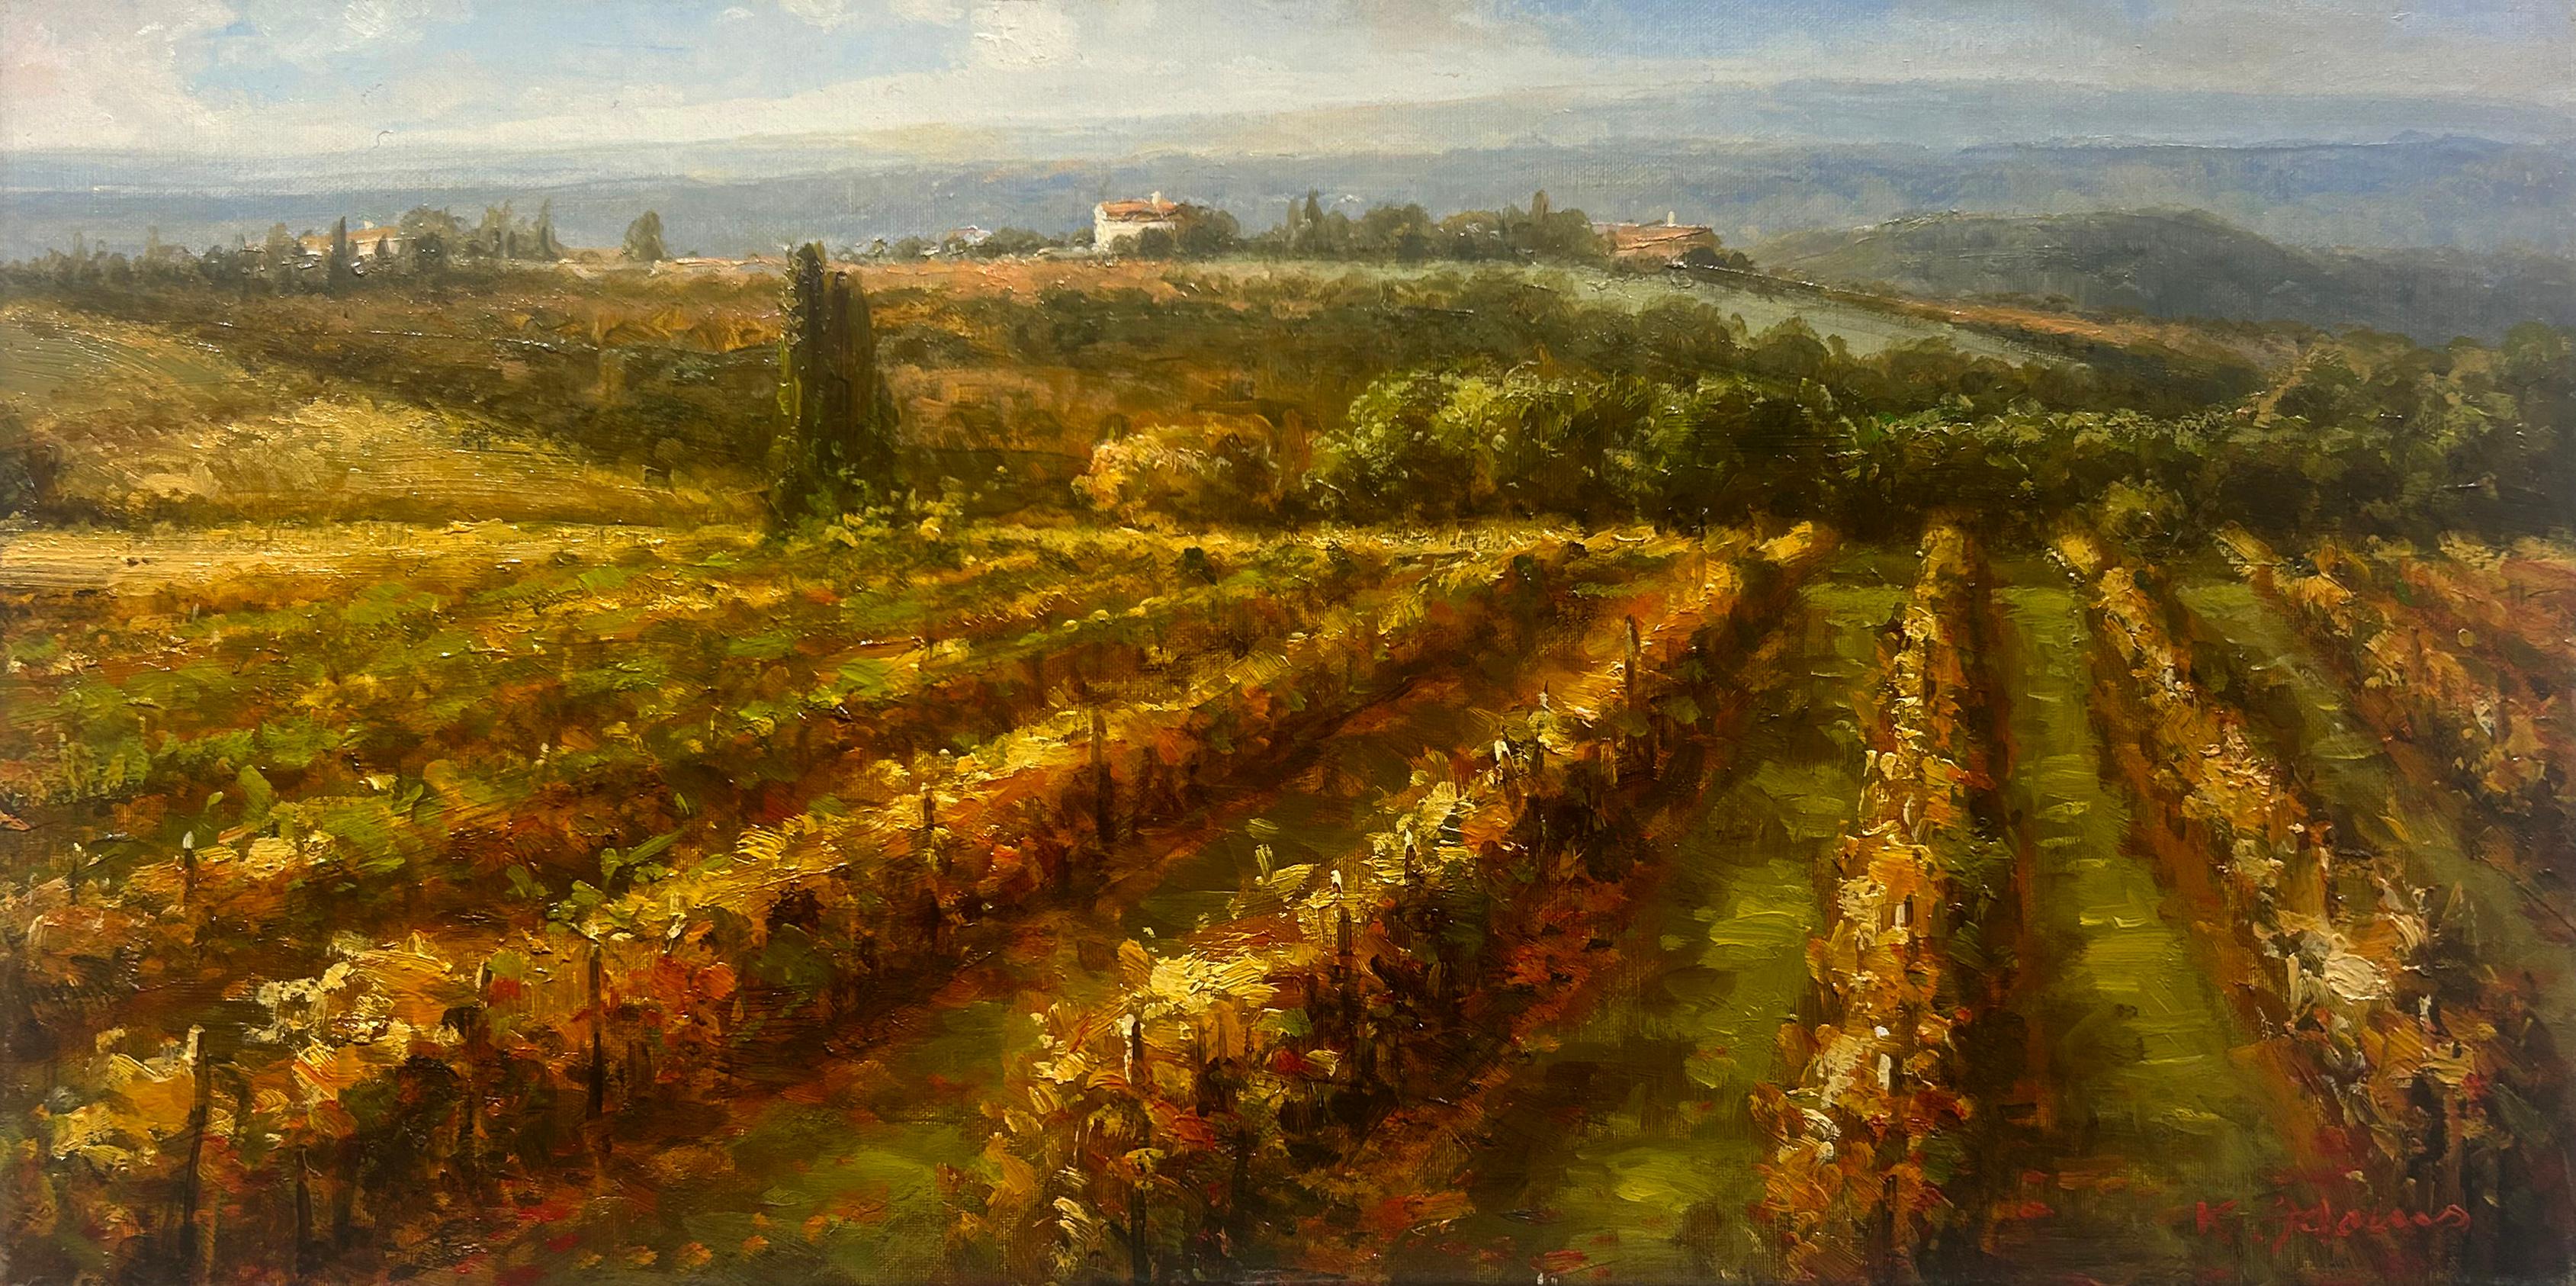 "Summer Evening" 12x24 is an oil painting on canvas by artist Ronald Adams. Featured is a peaceful and warm tuscan landscape. Thick and skillful brushstrokes carve out rows of grapevines to illustrate a rolling vineyard. Rows of tree bisect the